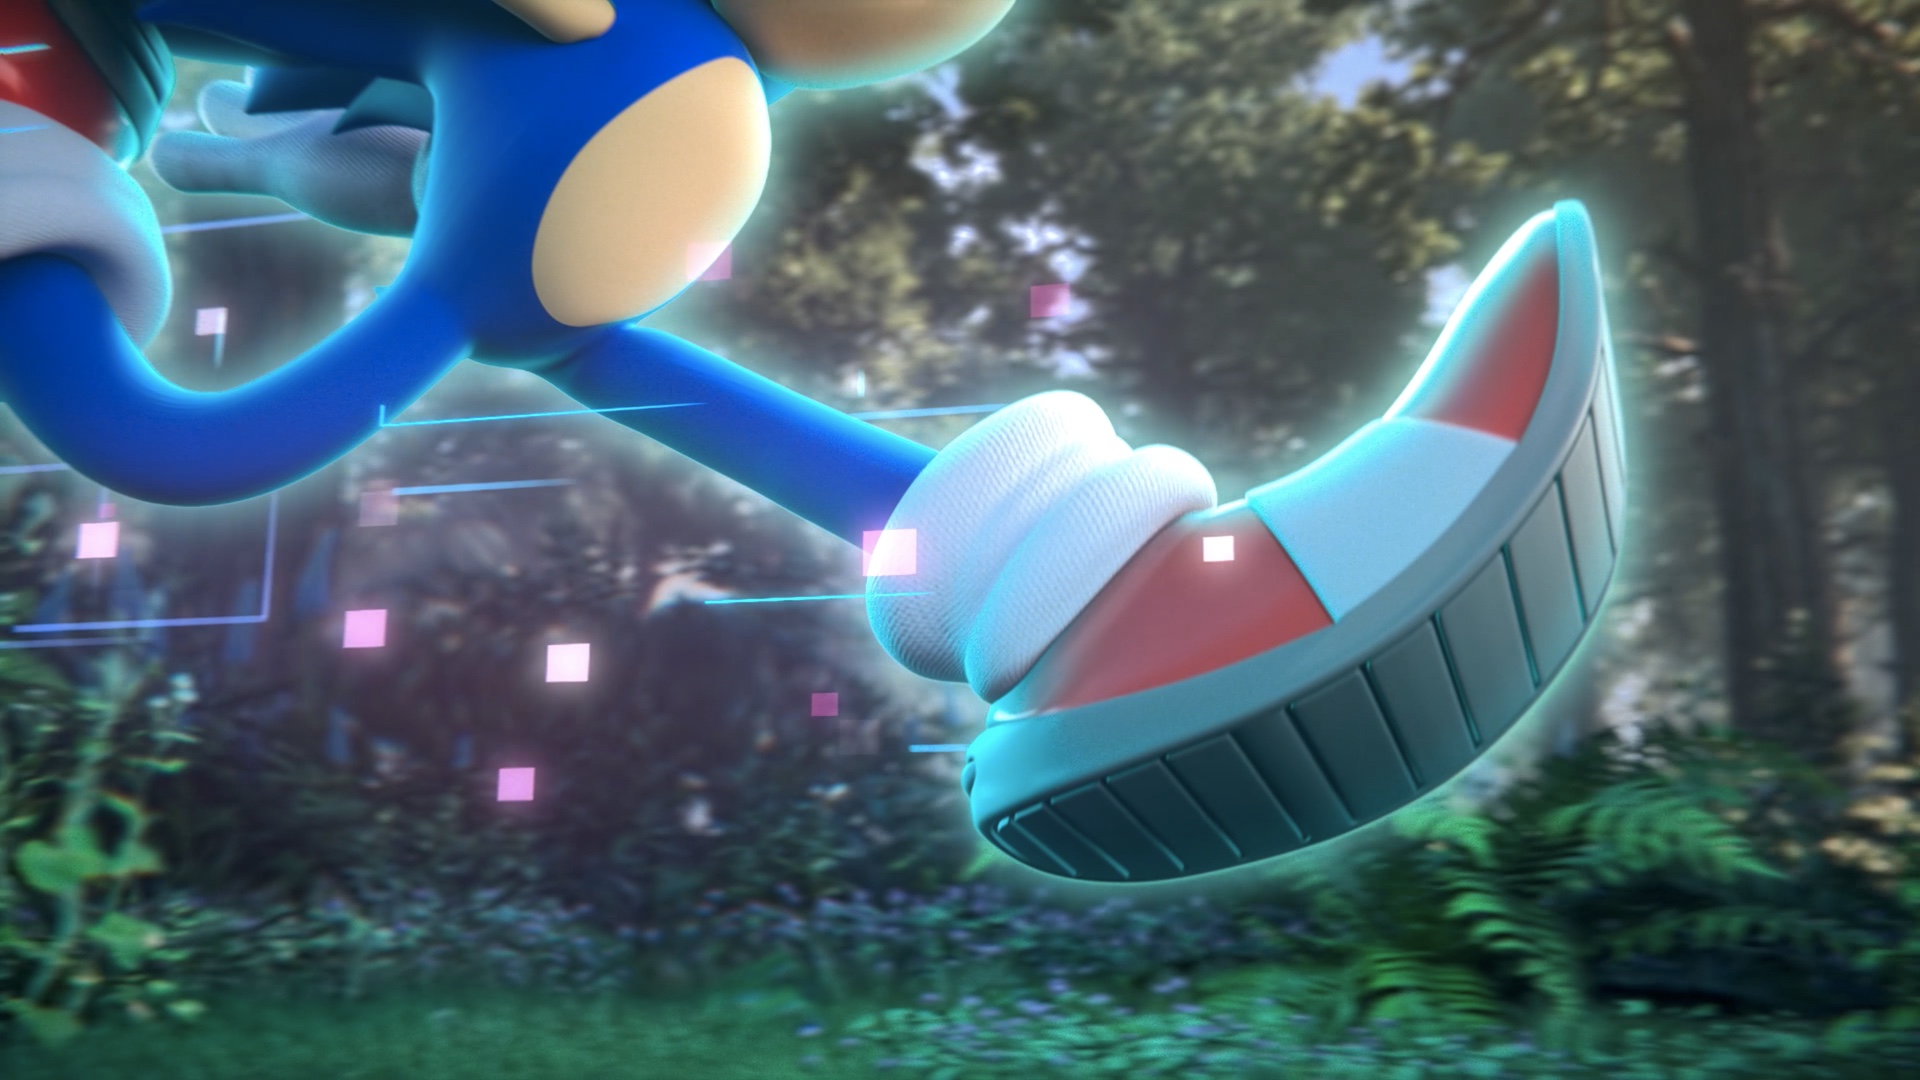 Sonic the Hedgehog runs through the forest with a glowing blue digital effect in a cinematic teaser for Sonic Rangers